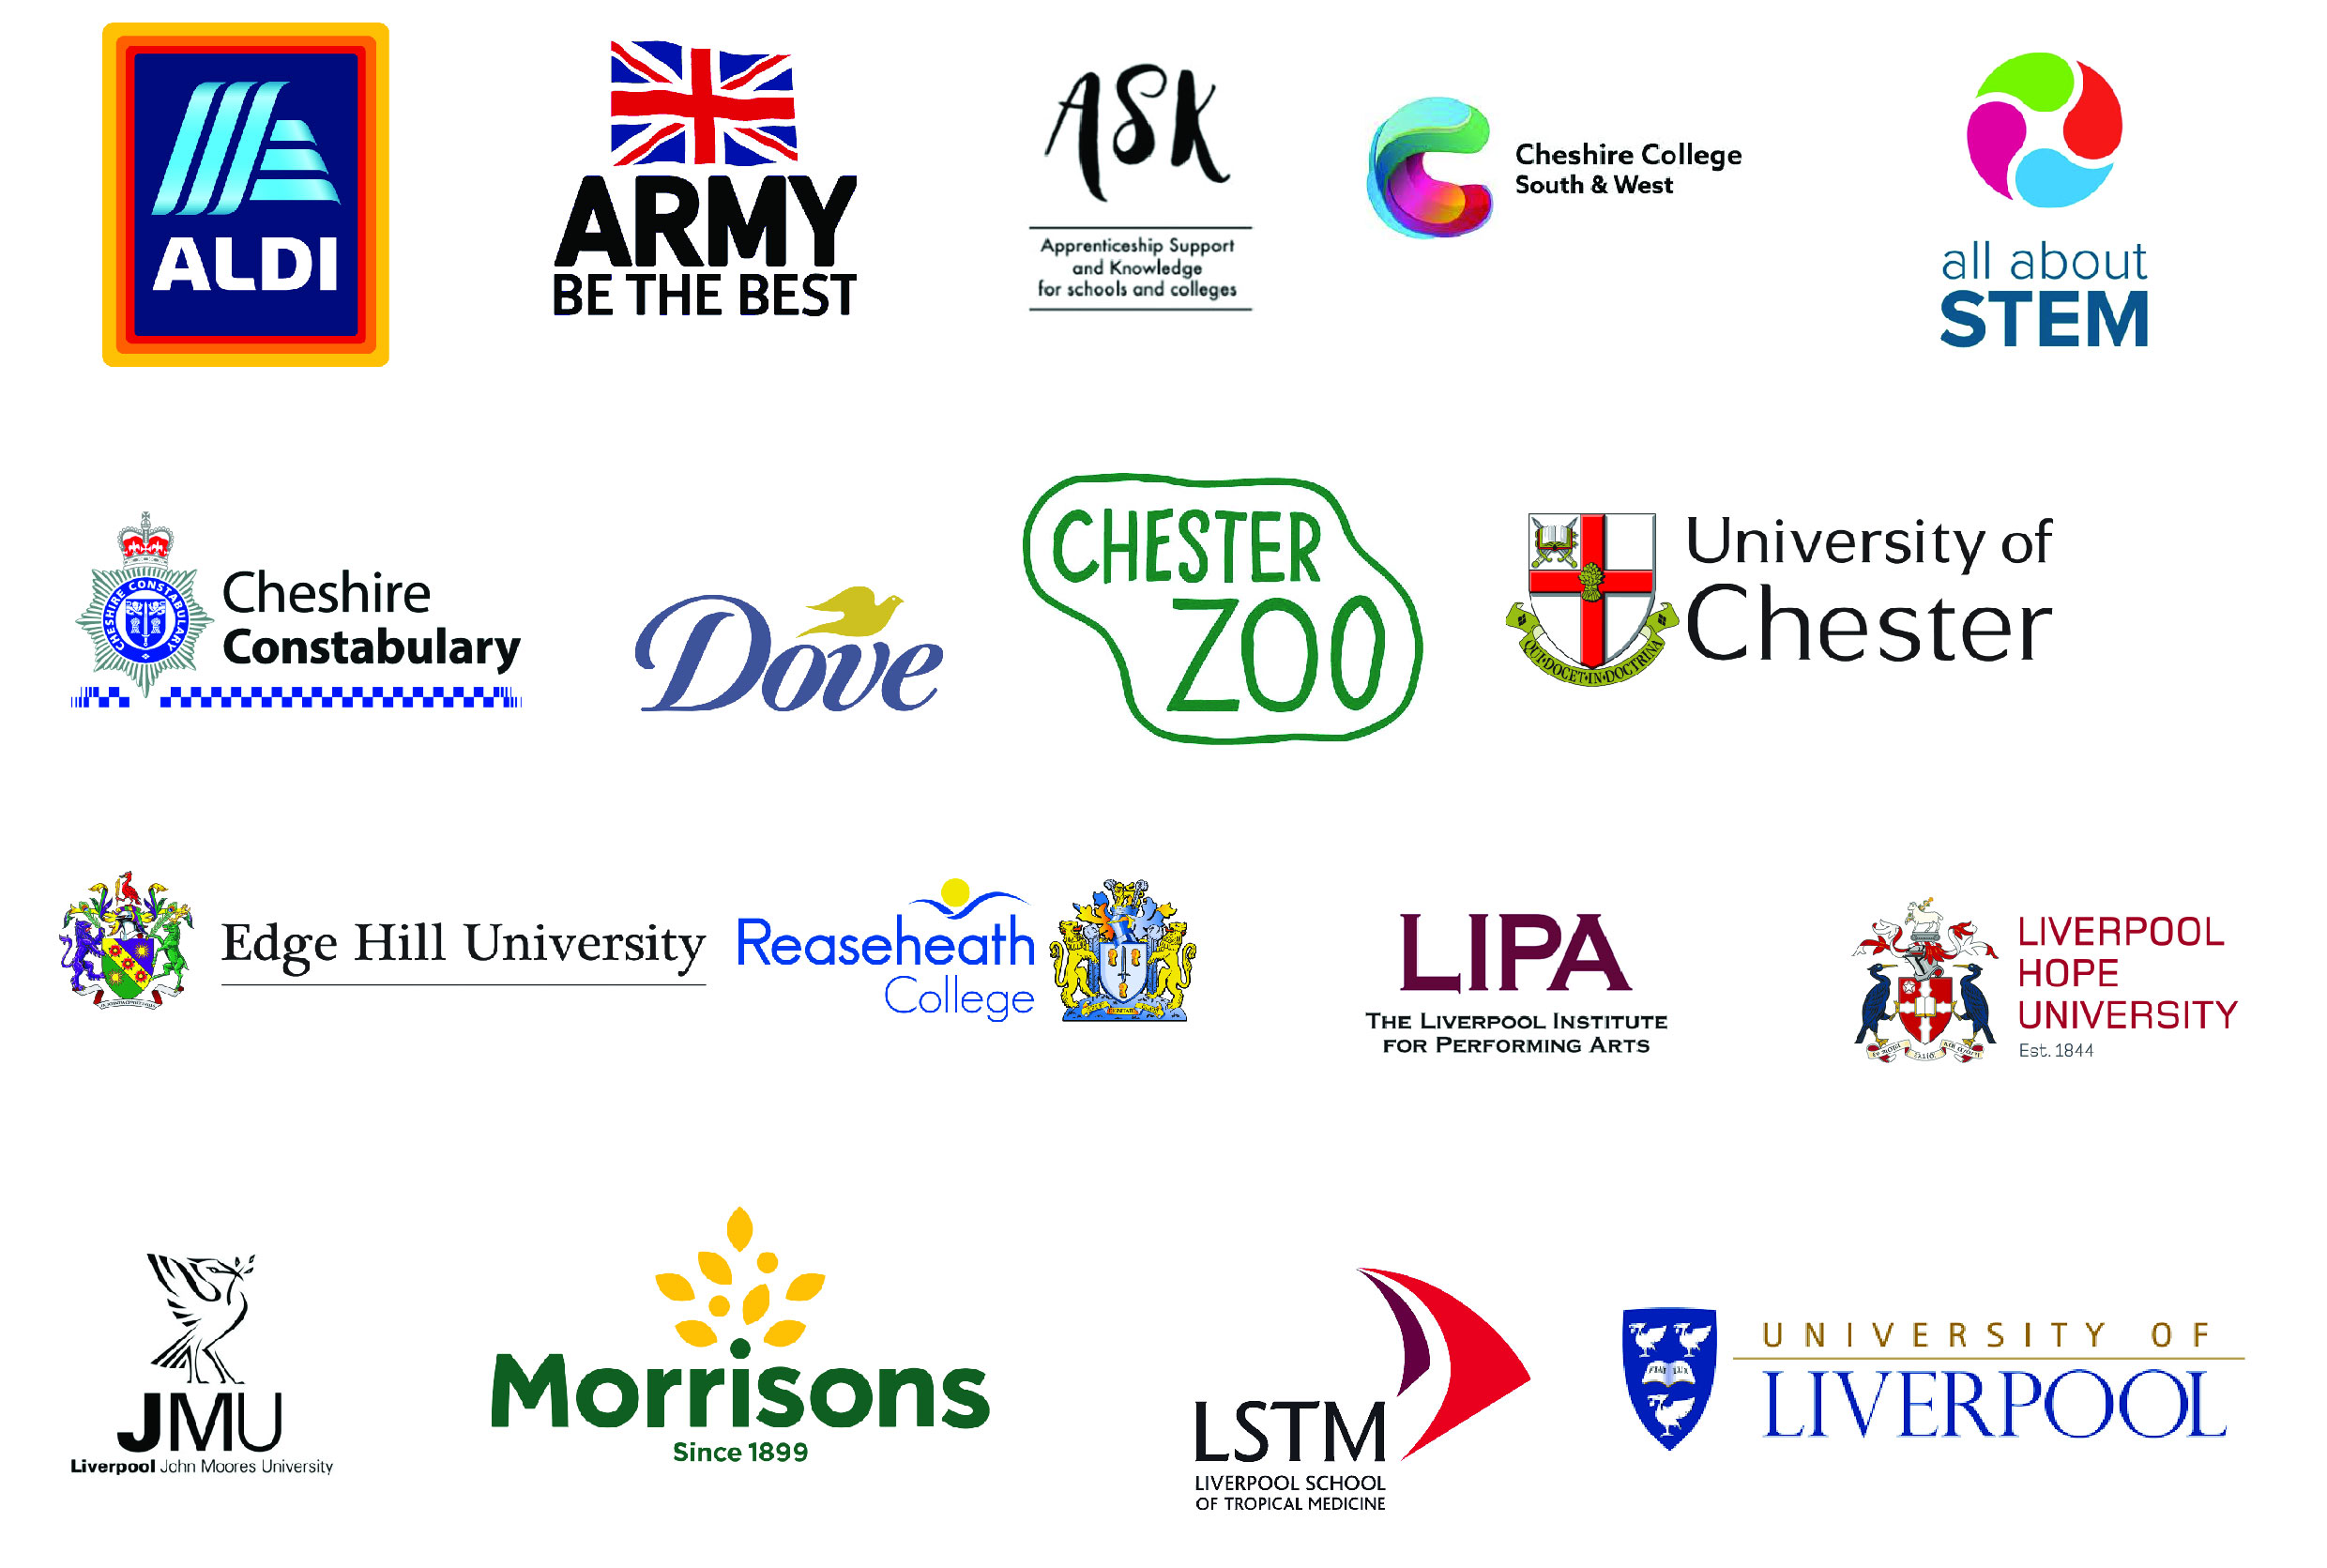 Aldi, Army, ASK, Cheshire College, All about STEM, Cheshire Constabulary, Dove, Chester Zoo, University of Chester, Edge Hill University, Reaseheath College, The Liverpool Institute for Performing Arts, Liverpool Hope University, Liverpool John Moores University, Morrisons, Liverpool School of Tropical Medicine, University of Liverpool